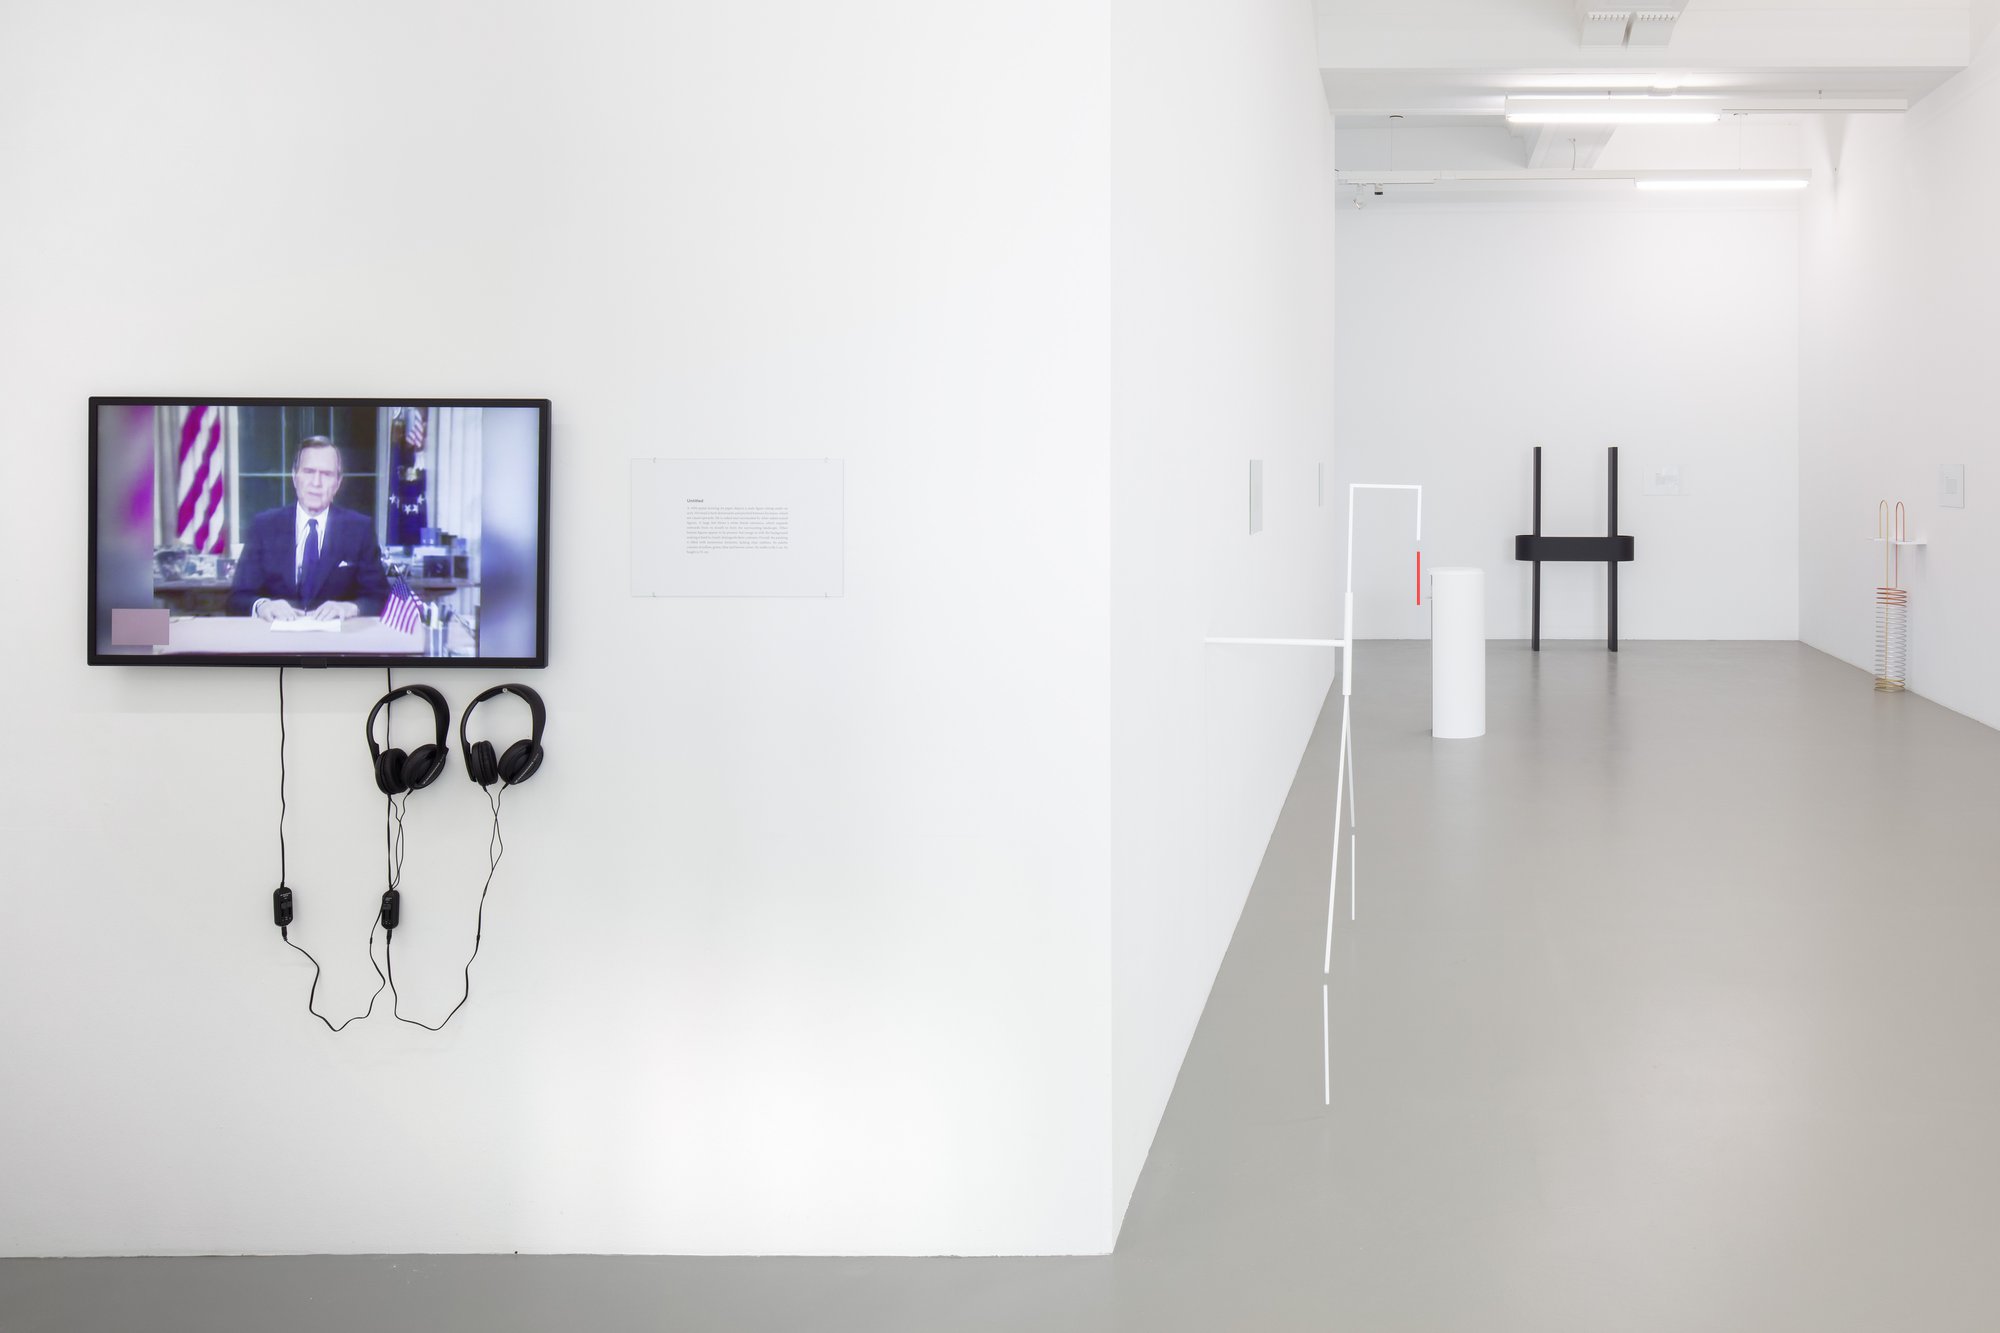 Installation view, Iman Issa, Book of Facts, daadgalerie, Berlin